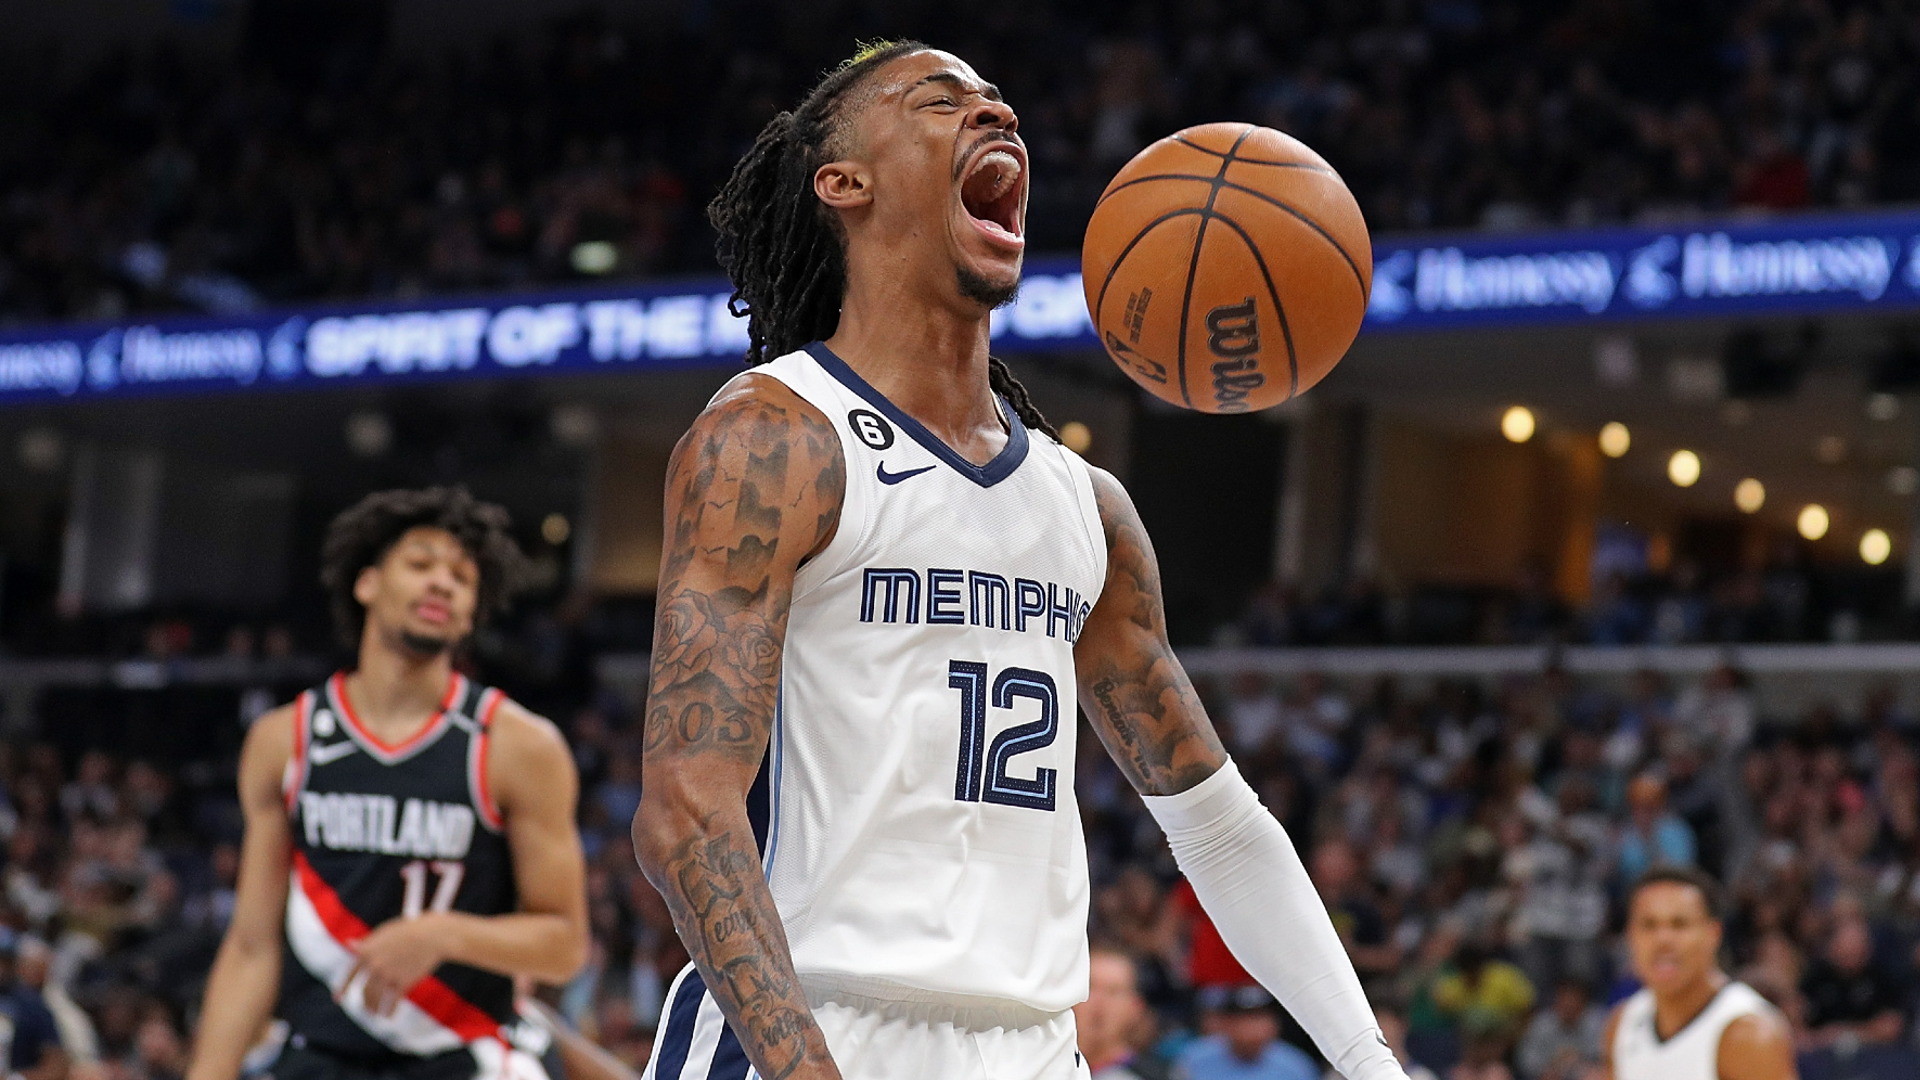 Watch every angle of Ja Morant's insane poster dunk in Grizzlies game vs. Trail Blazers